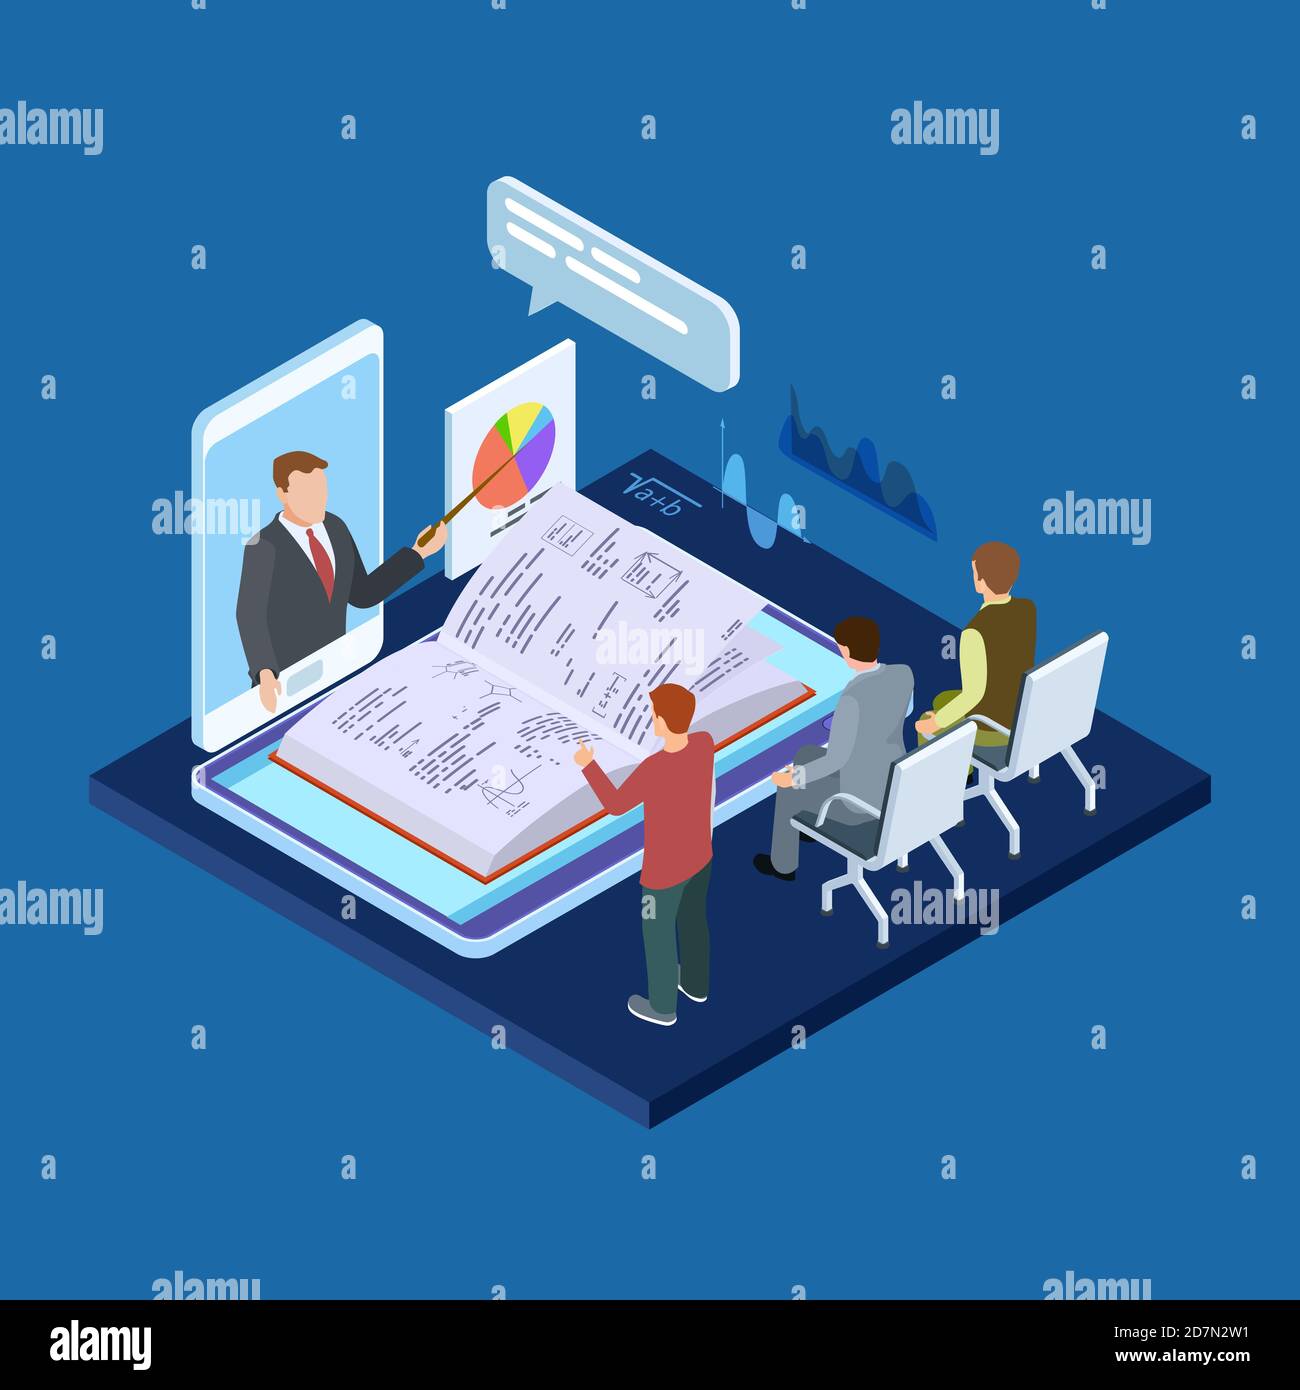 Online business training 3d isometric vector concept. Illustration of online e-learning, web video training Stock Vector